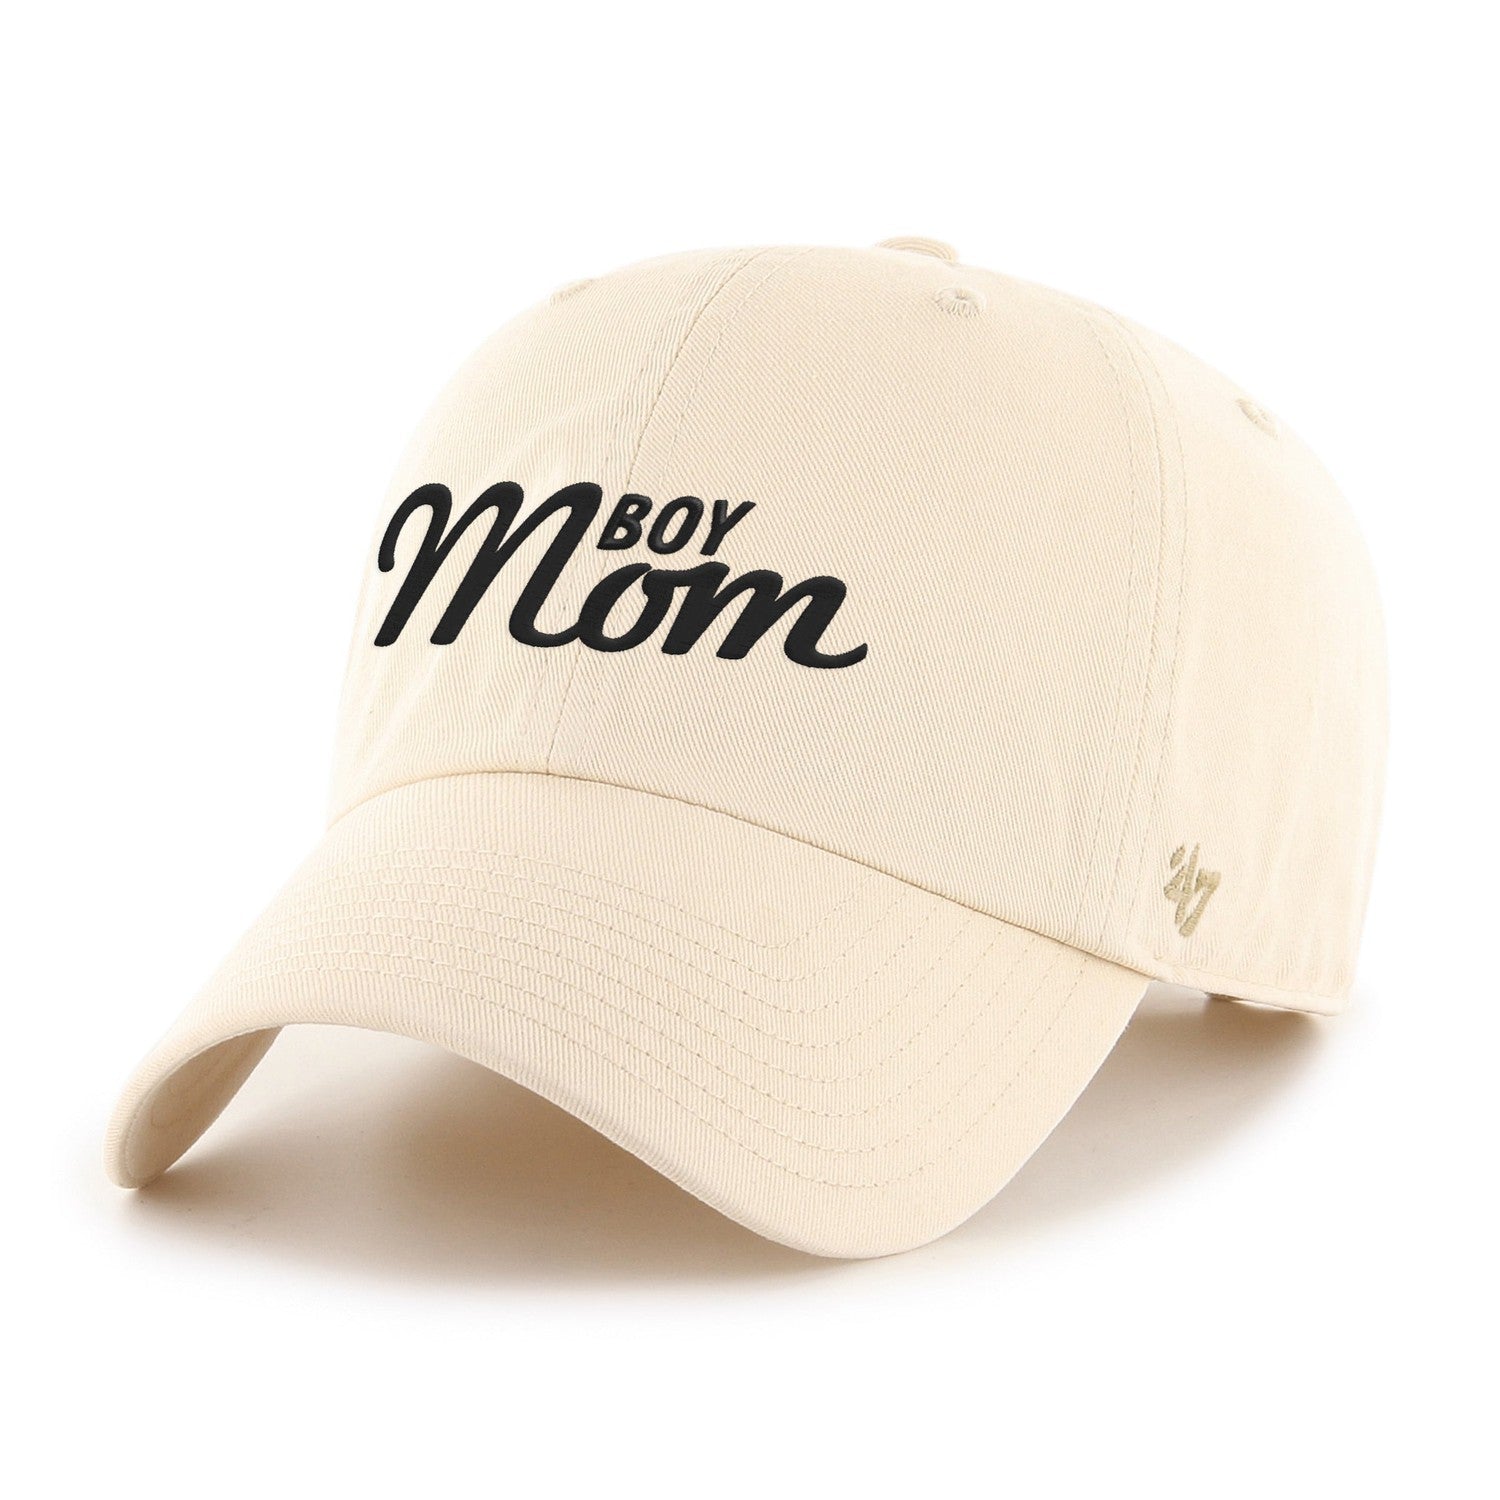 Boy Mom '47 Clean Up Hat - Bussin With The Boys Hats, Clothing 